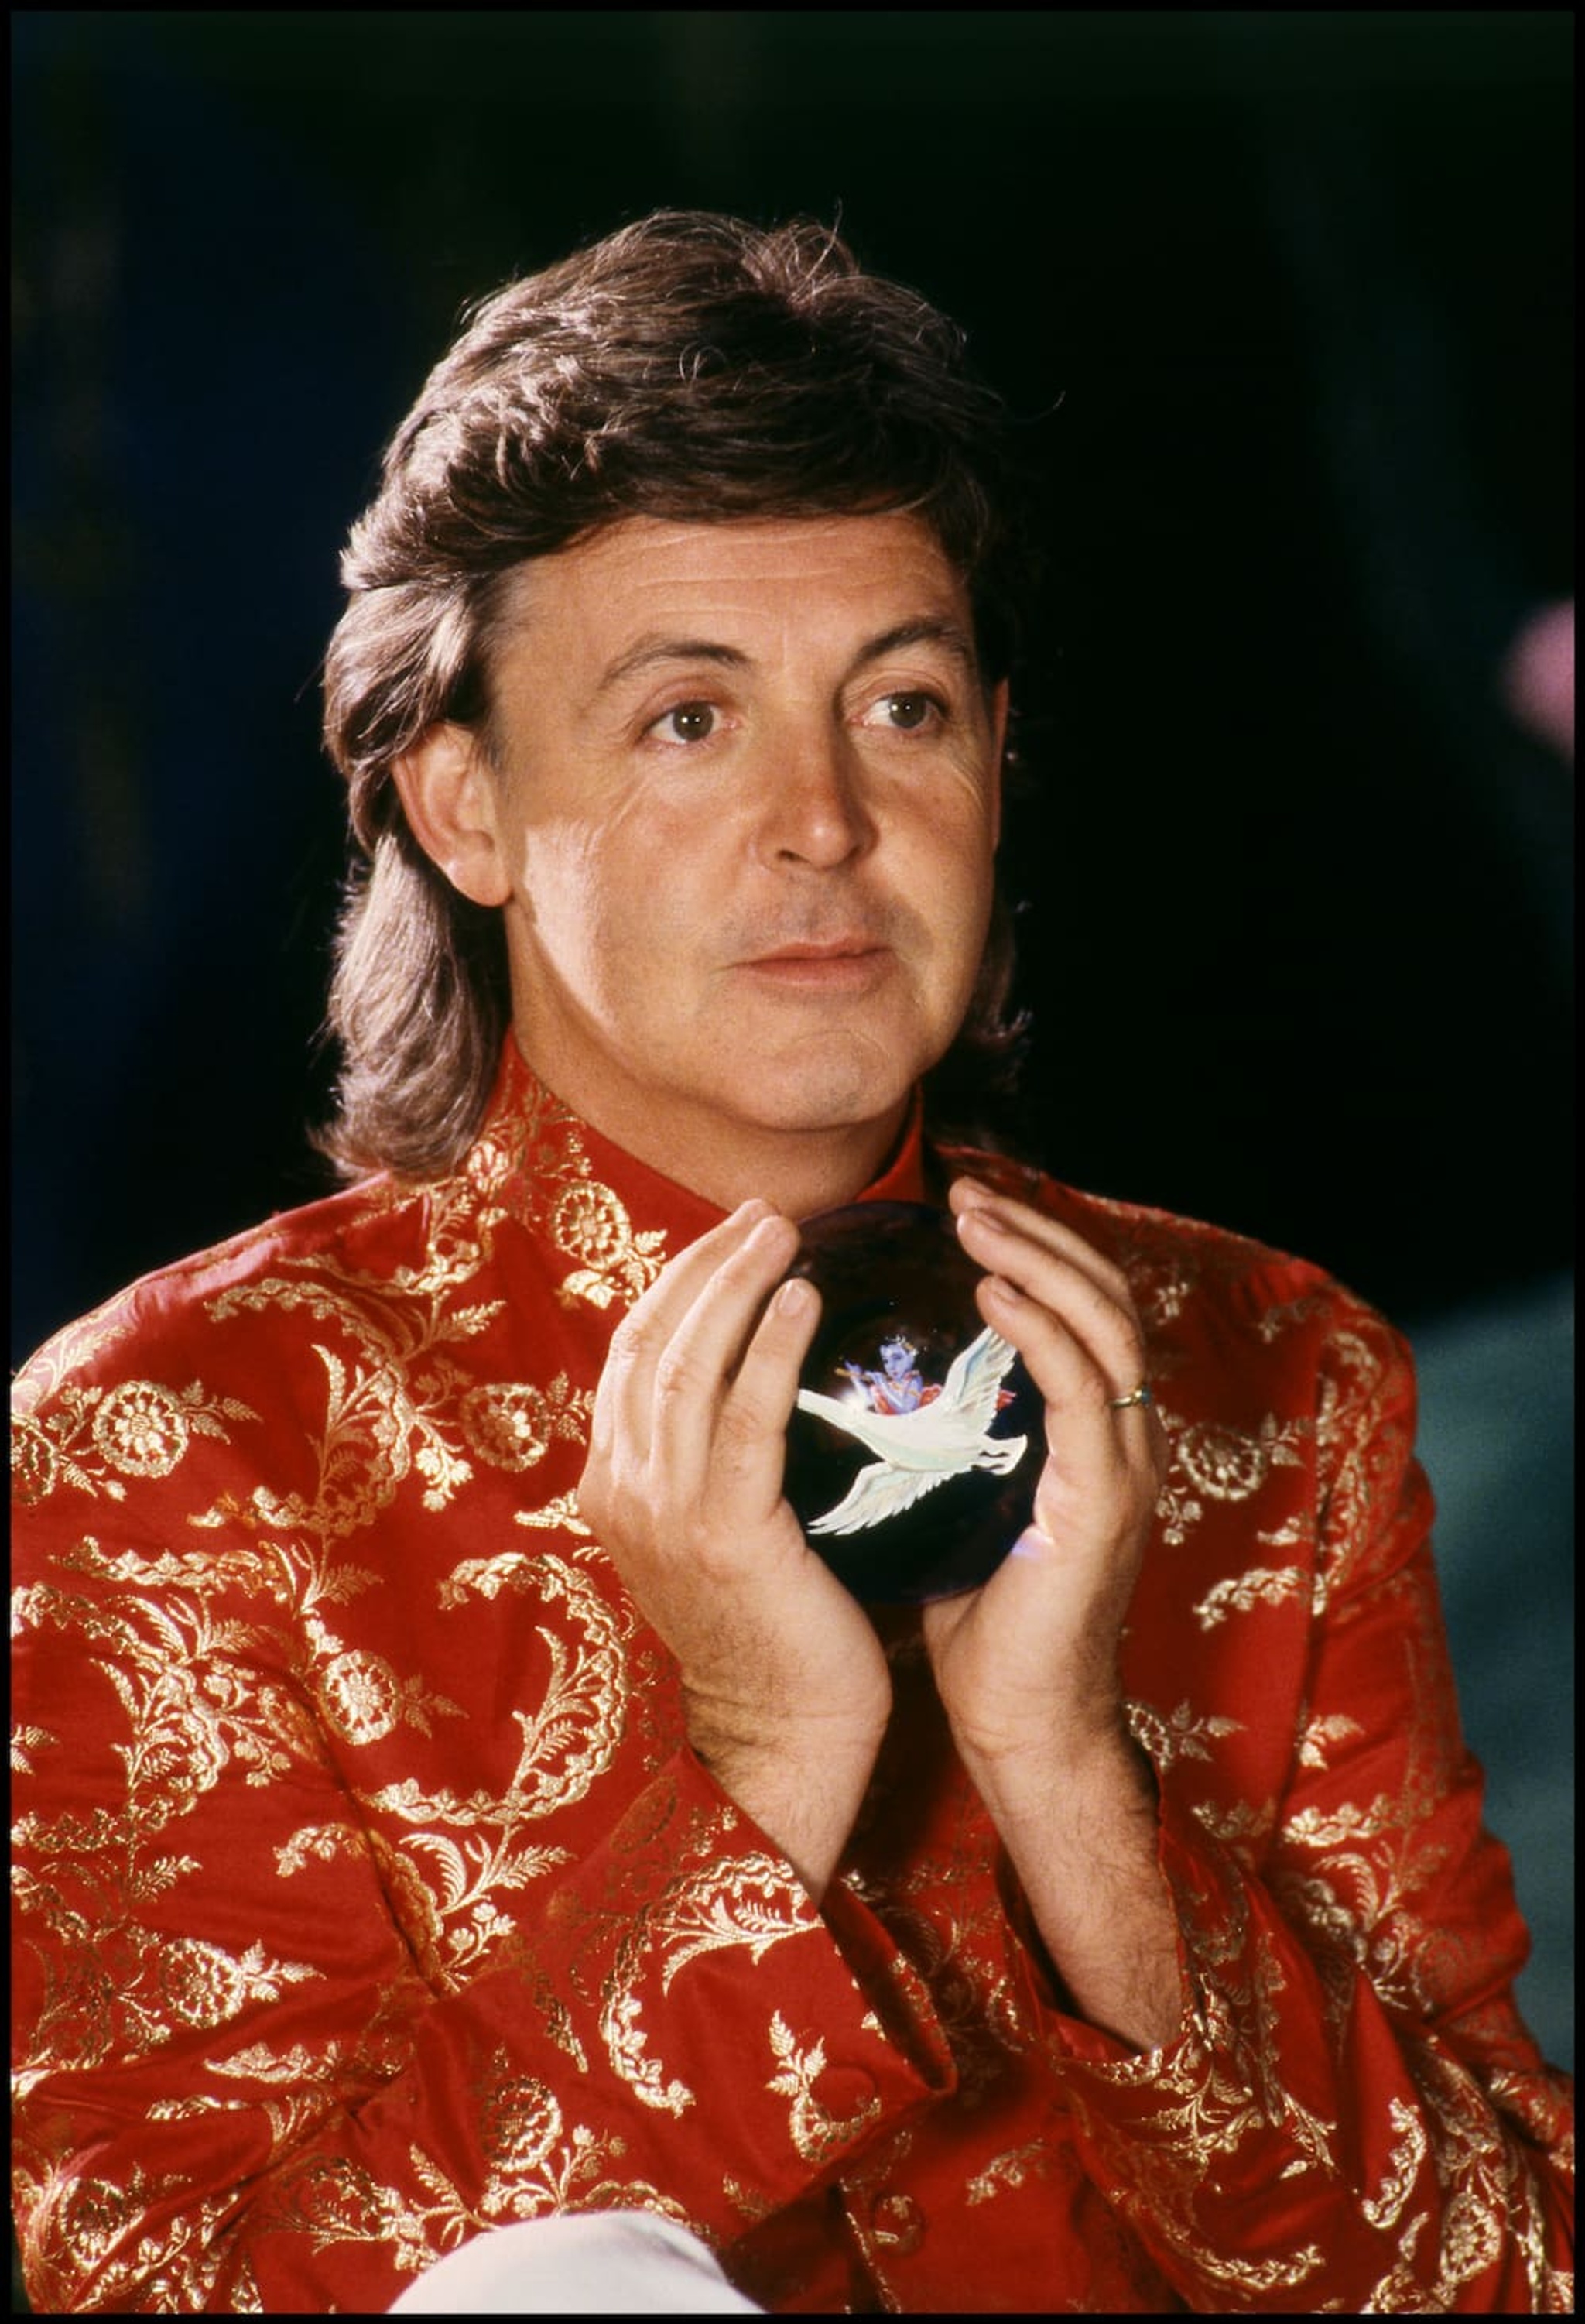 Photo of Paul McCartney on set at the video shoot for 'This One' directed by Tim Pope.